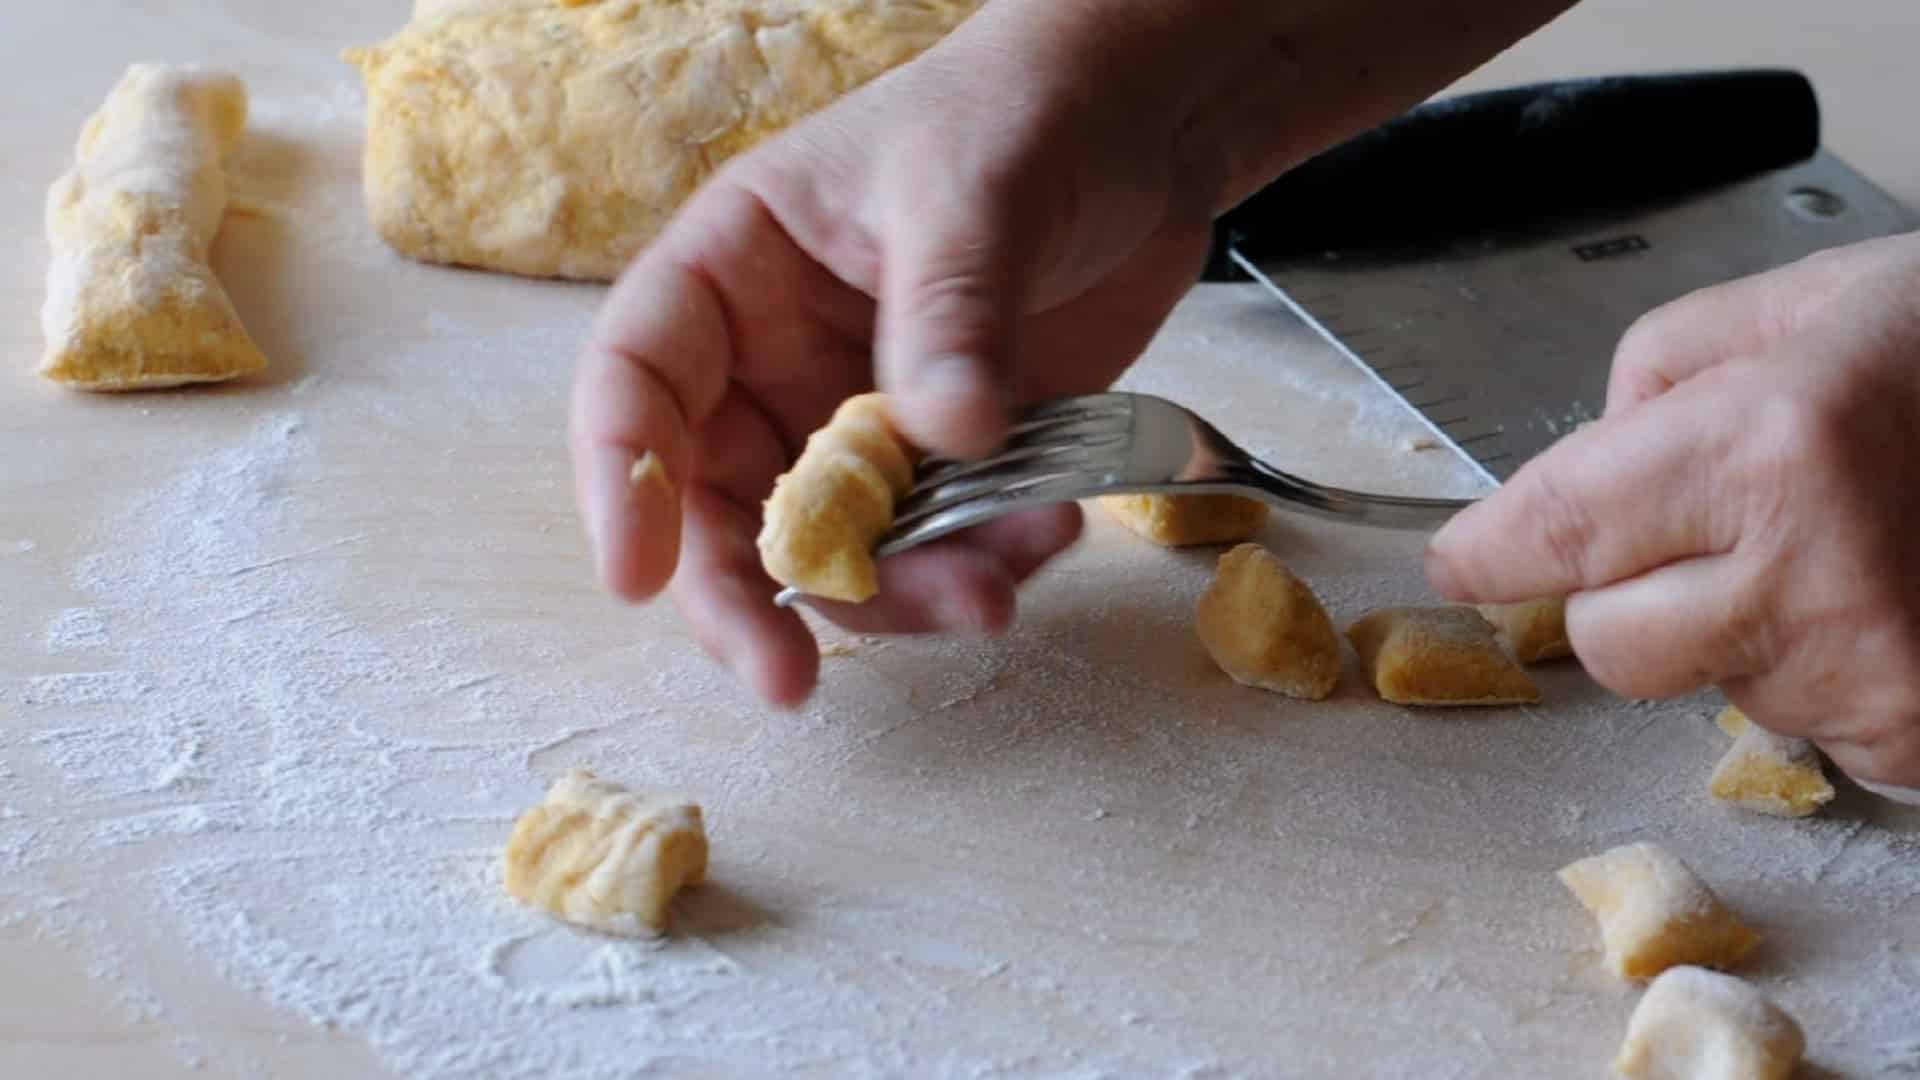 Gently press the back of a fork onto each gnocchi to create the classic ridged pattern